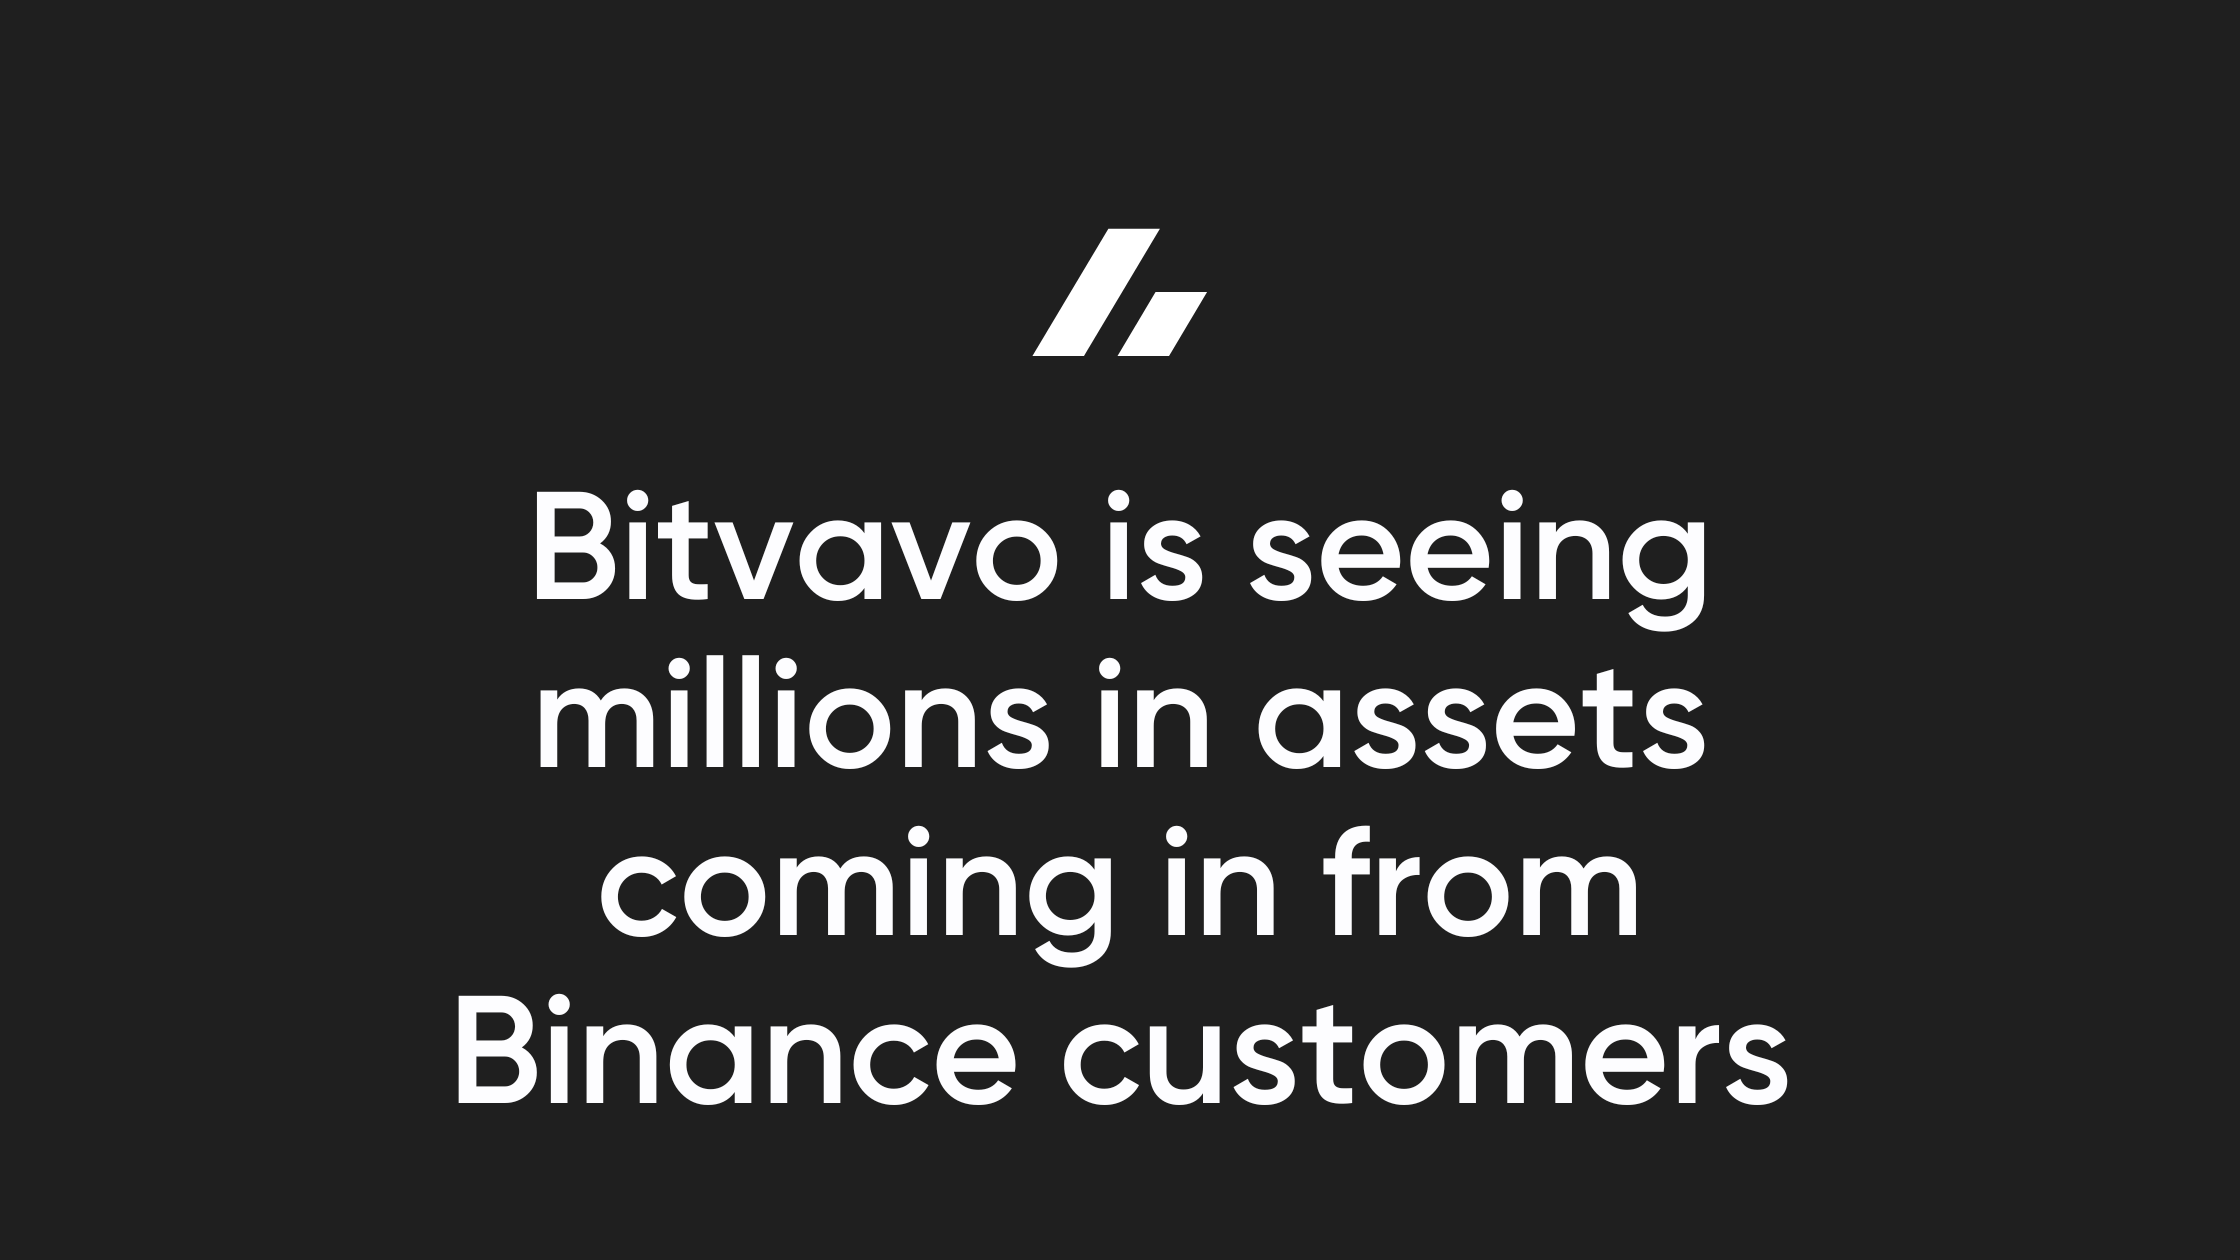 Bitvavo is seeing millions in assets coming in from Binance customers